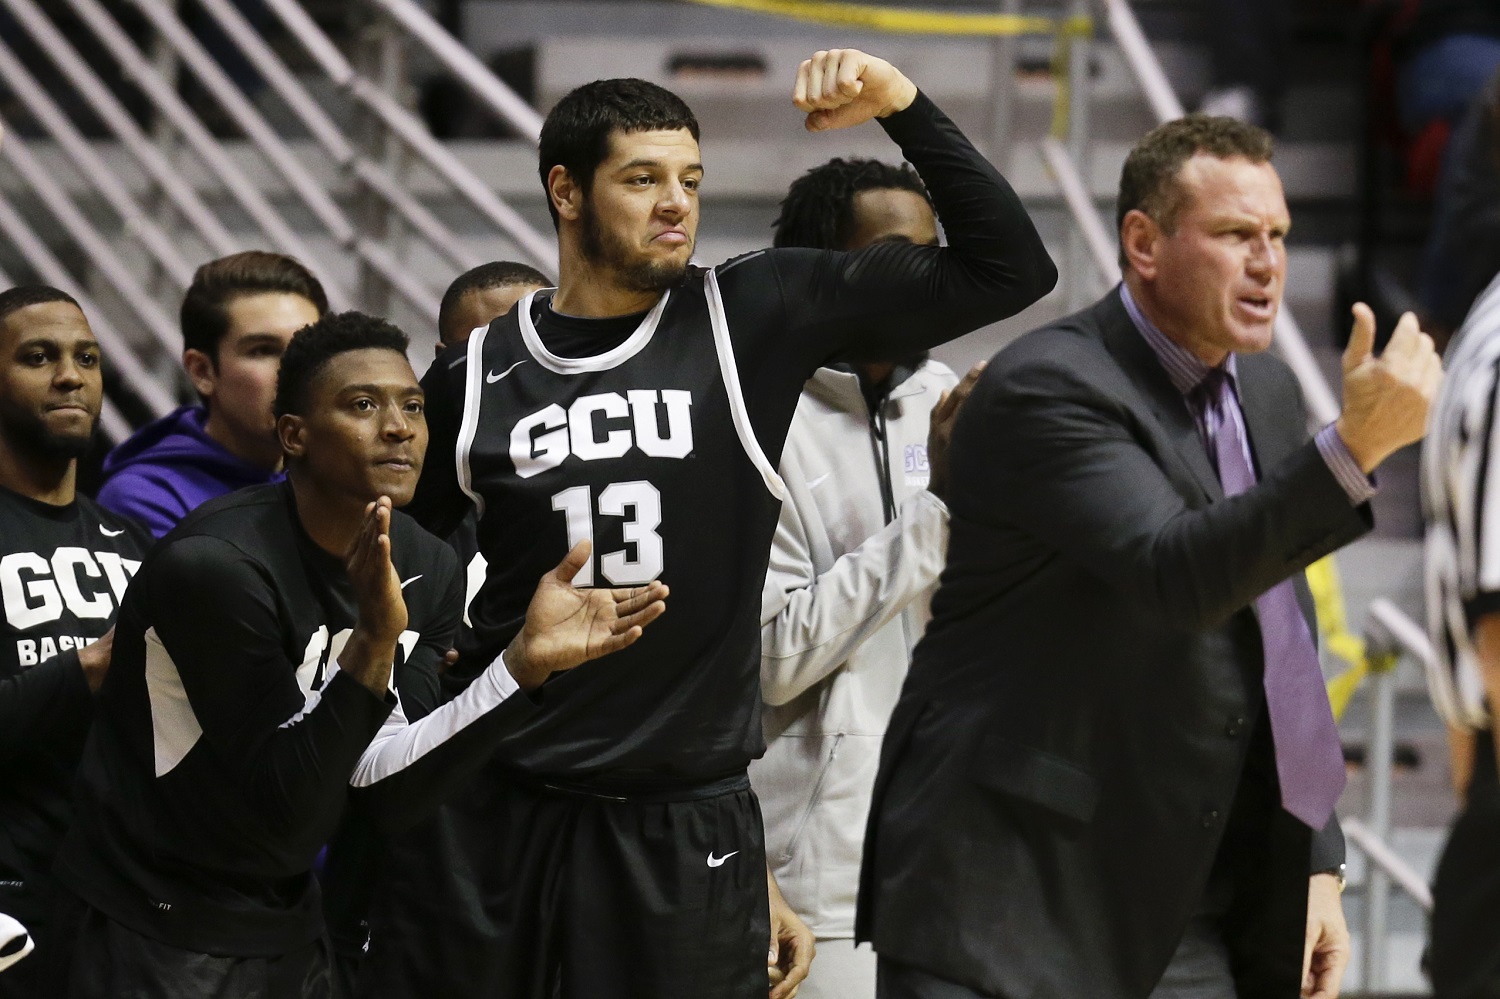 Grand Canyon State forward Uros Ljeskovic (13) and others on the bench react during the second half of an NCAA college basketball game against San Diego State on Friday, Dec. 18, 2015, in San Diego. Coach Dan Majerle motions is at right. (AP Photo/Gregory Bull)